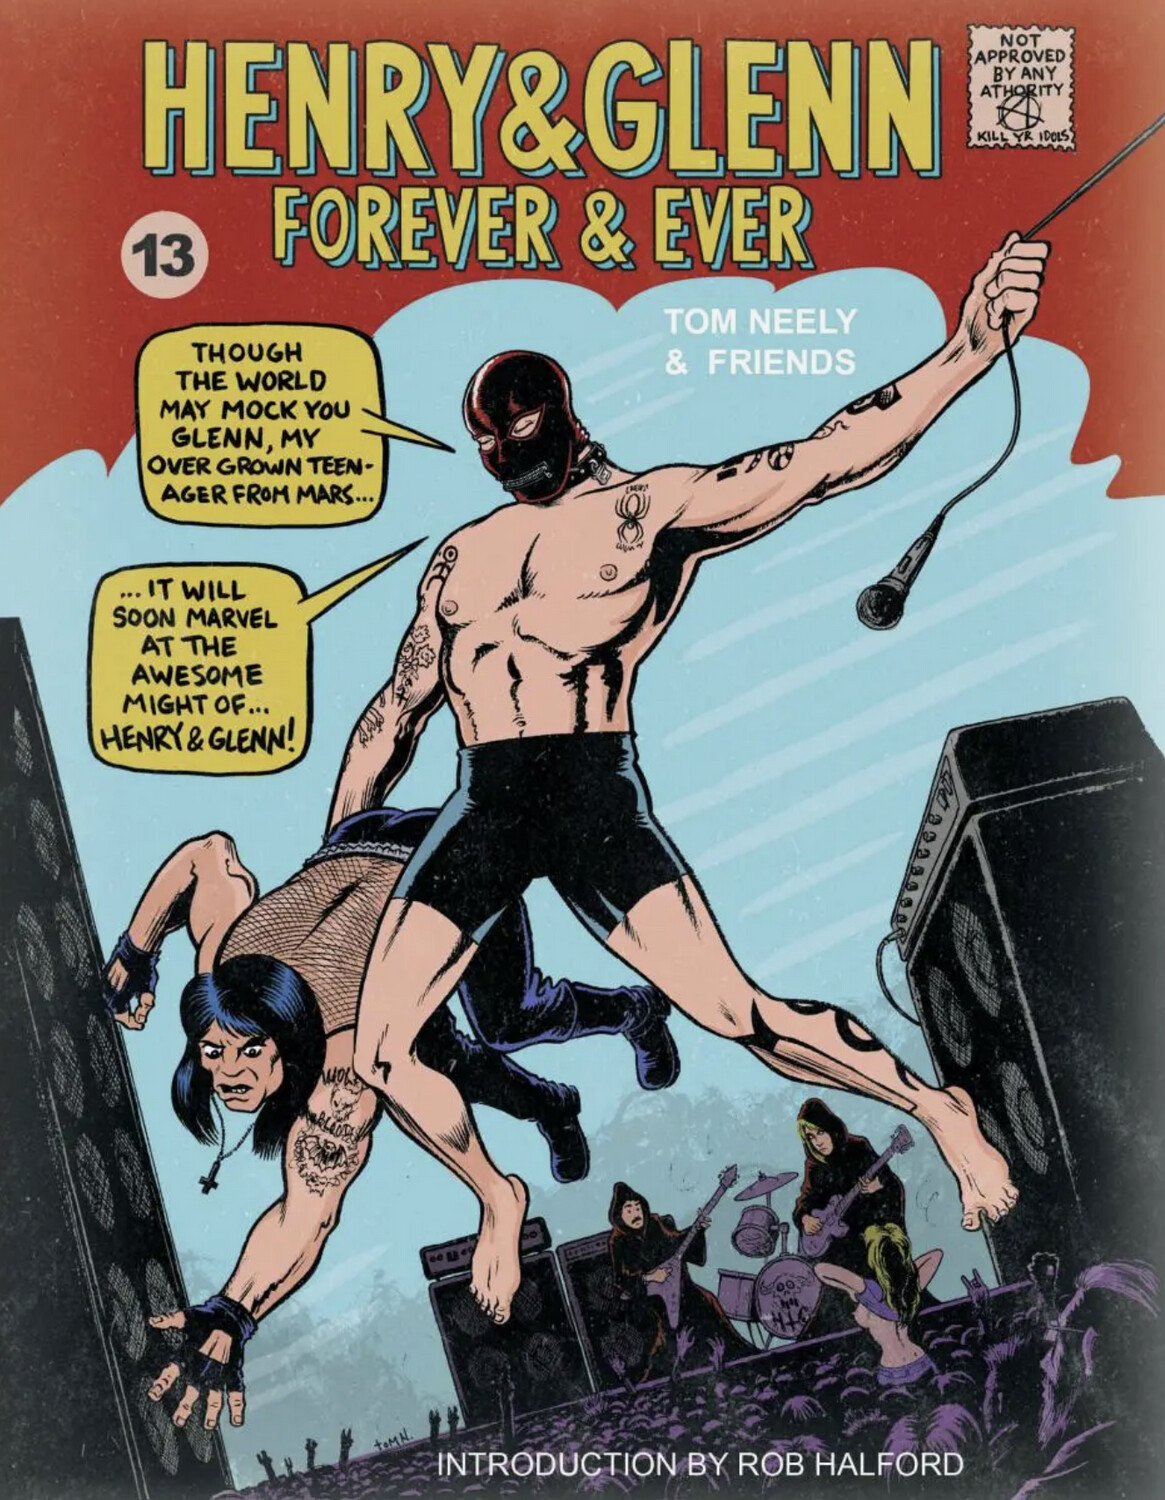 Henry & Glenn Forever & Ever: Ridiculously Complete Edition - Graphic Novel by Tom Neely & Friends